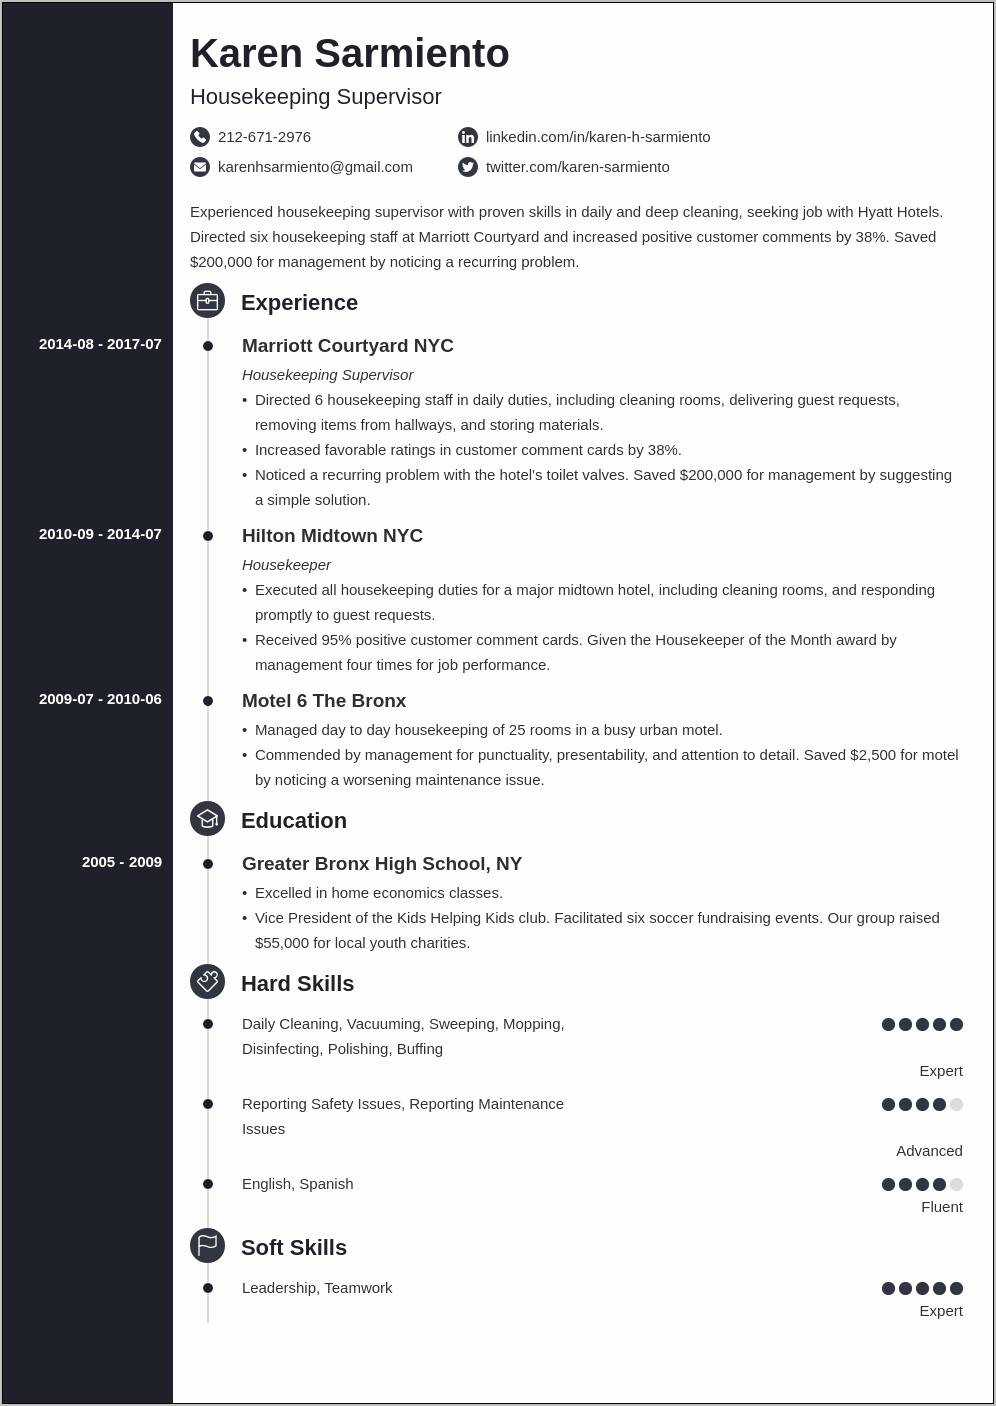 Resume Objective For Cleaning Job